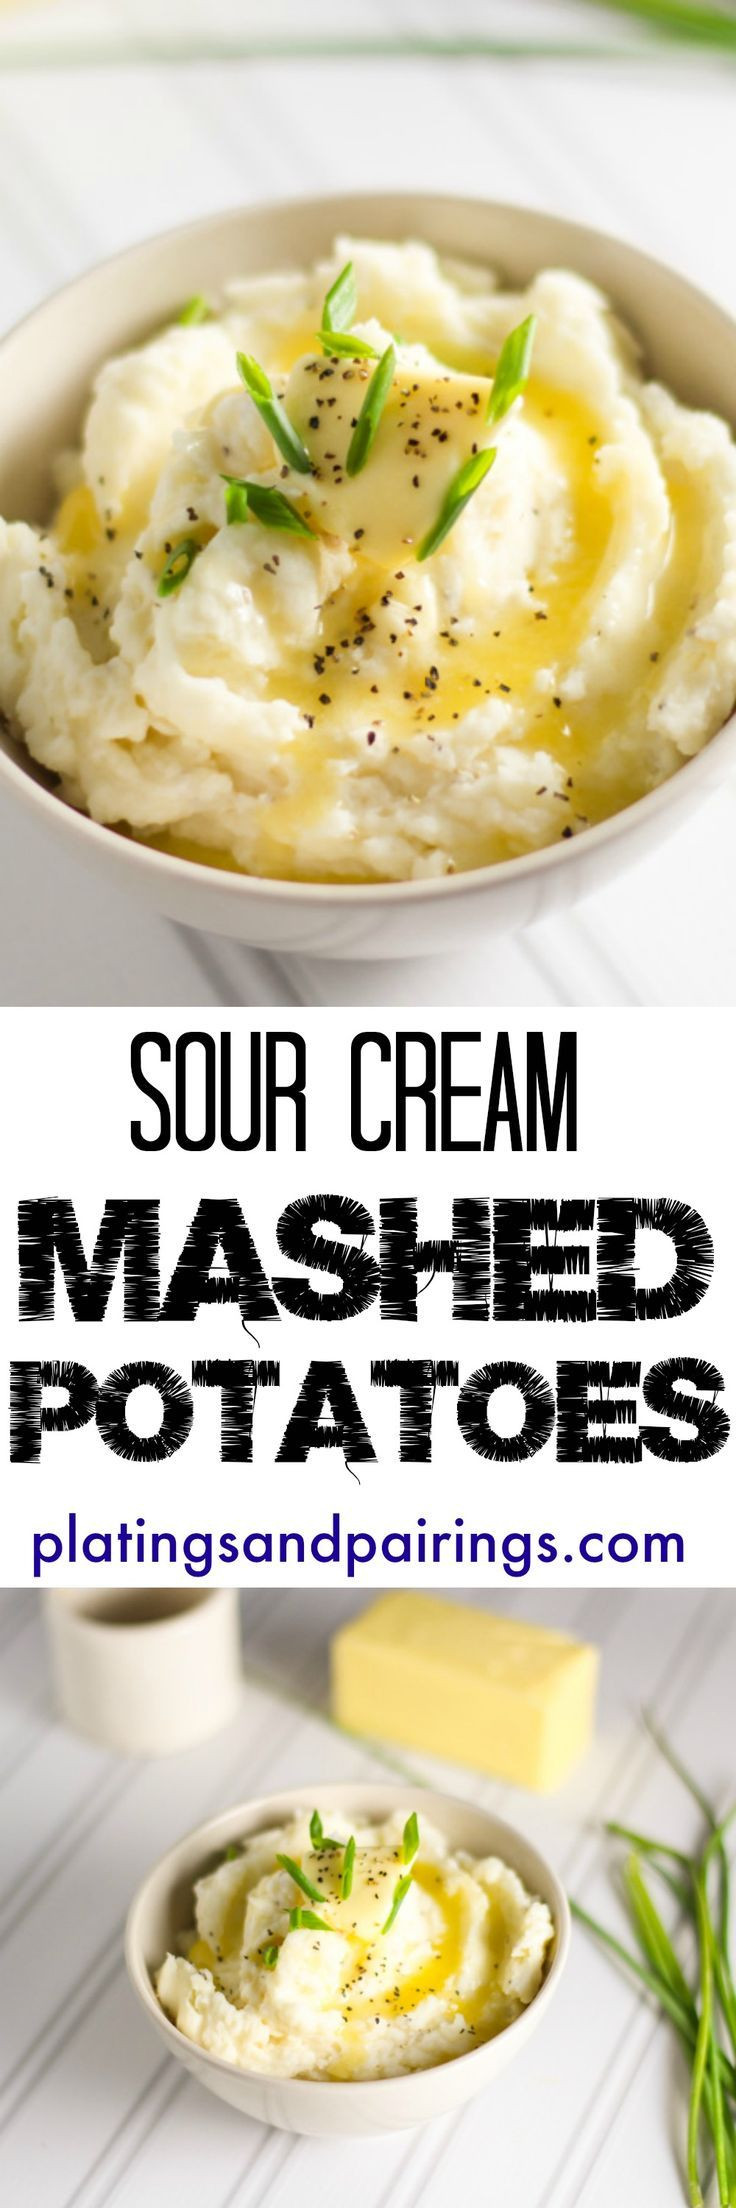 Sour Cream Mashed Potatoes
 17 Best images about Great Gatsby Cotton Club